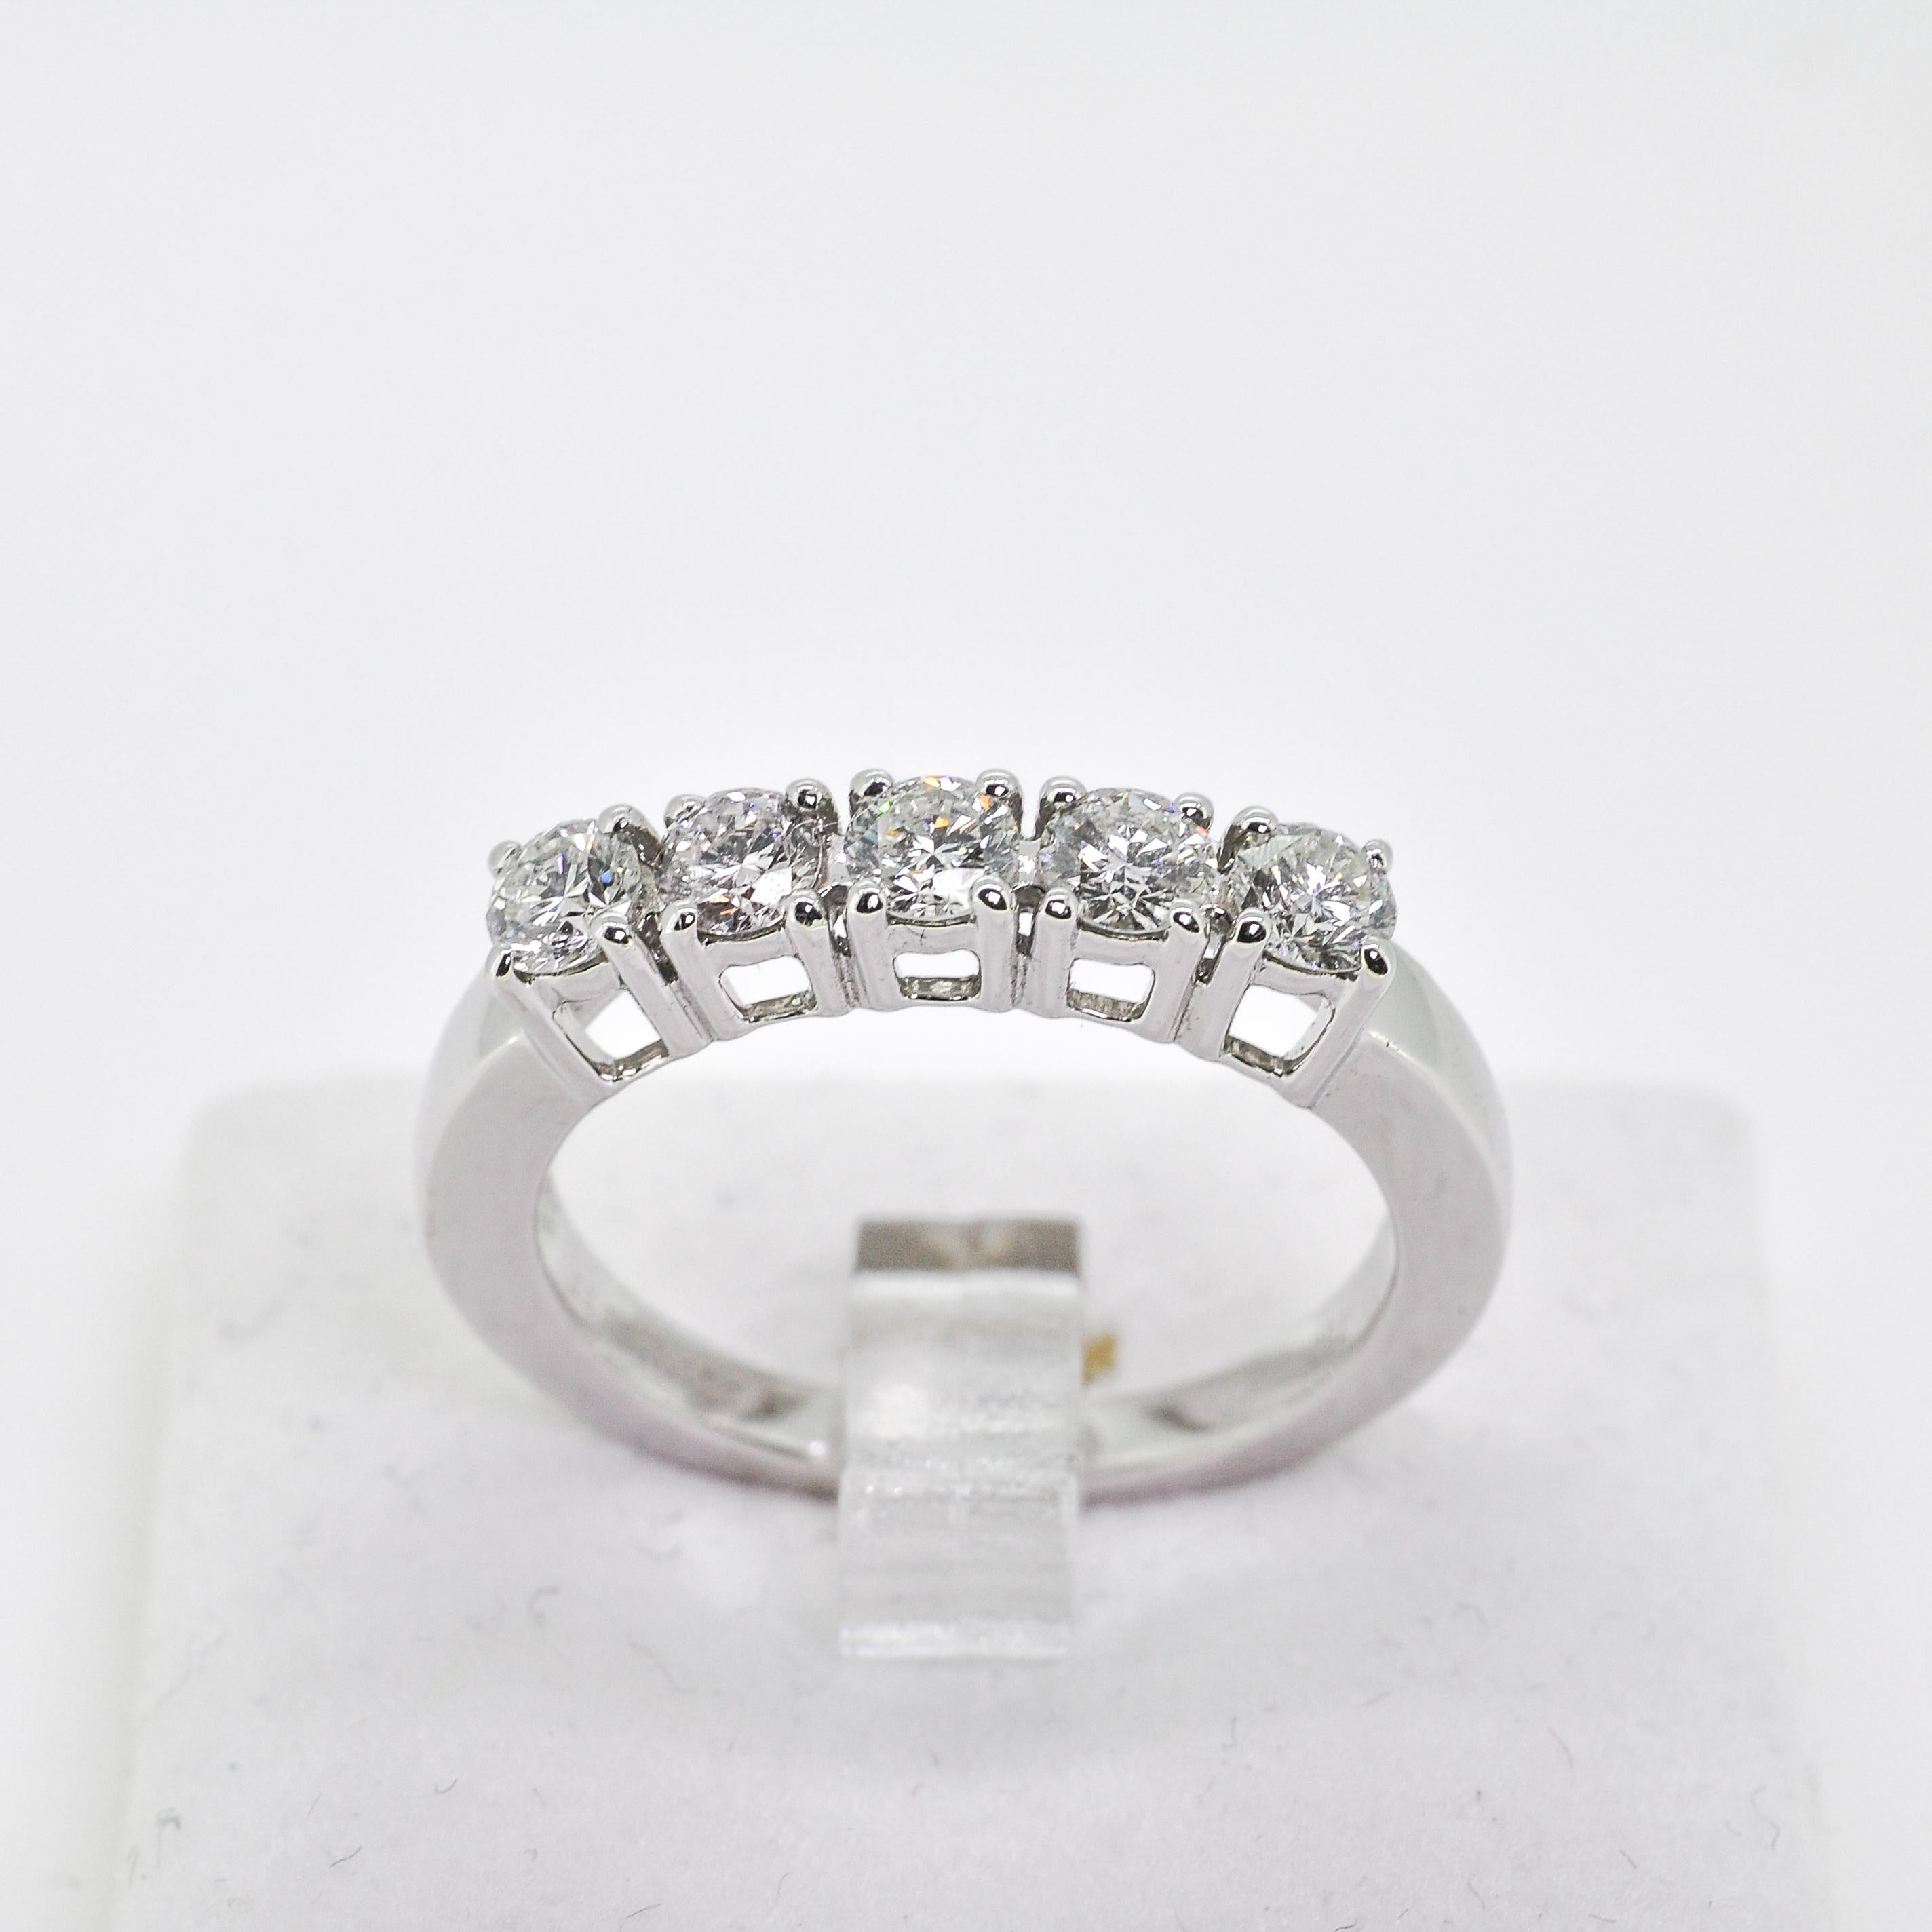 Round Cut Natural Diamond Ring 0.85 carats 18KT White Gold 5 Round Solitaire Diamond Ring For Sale